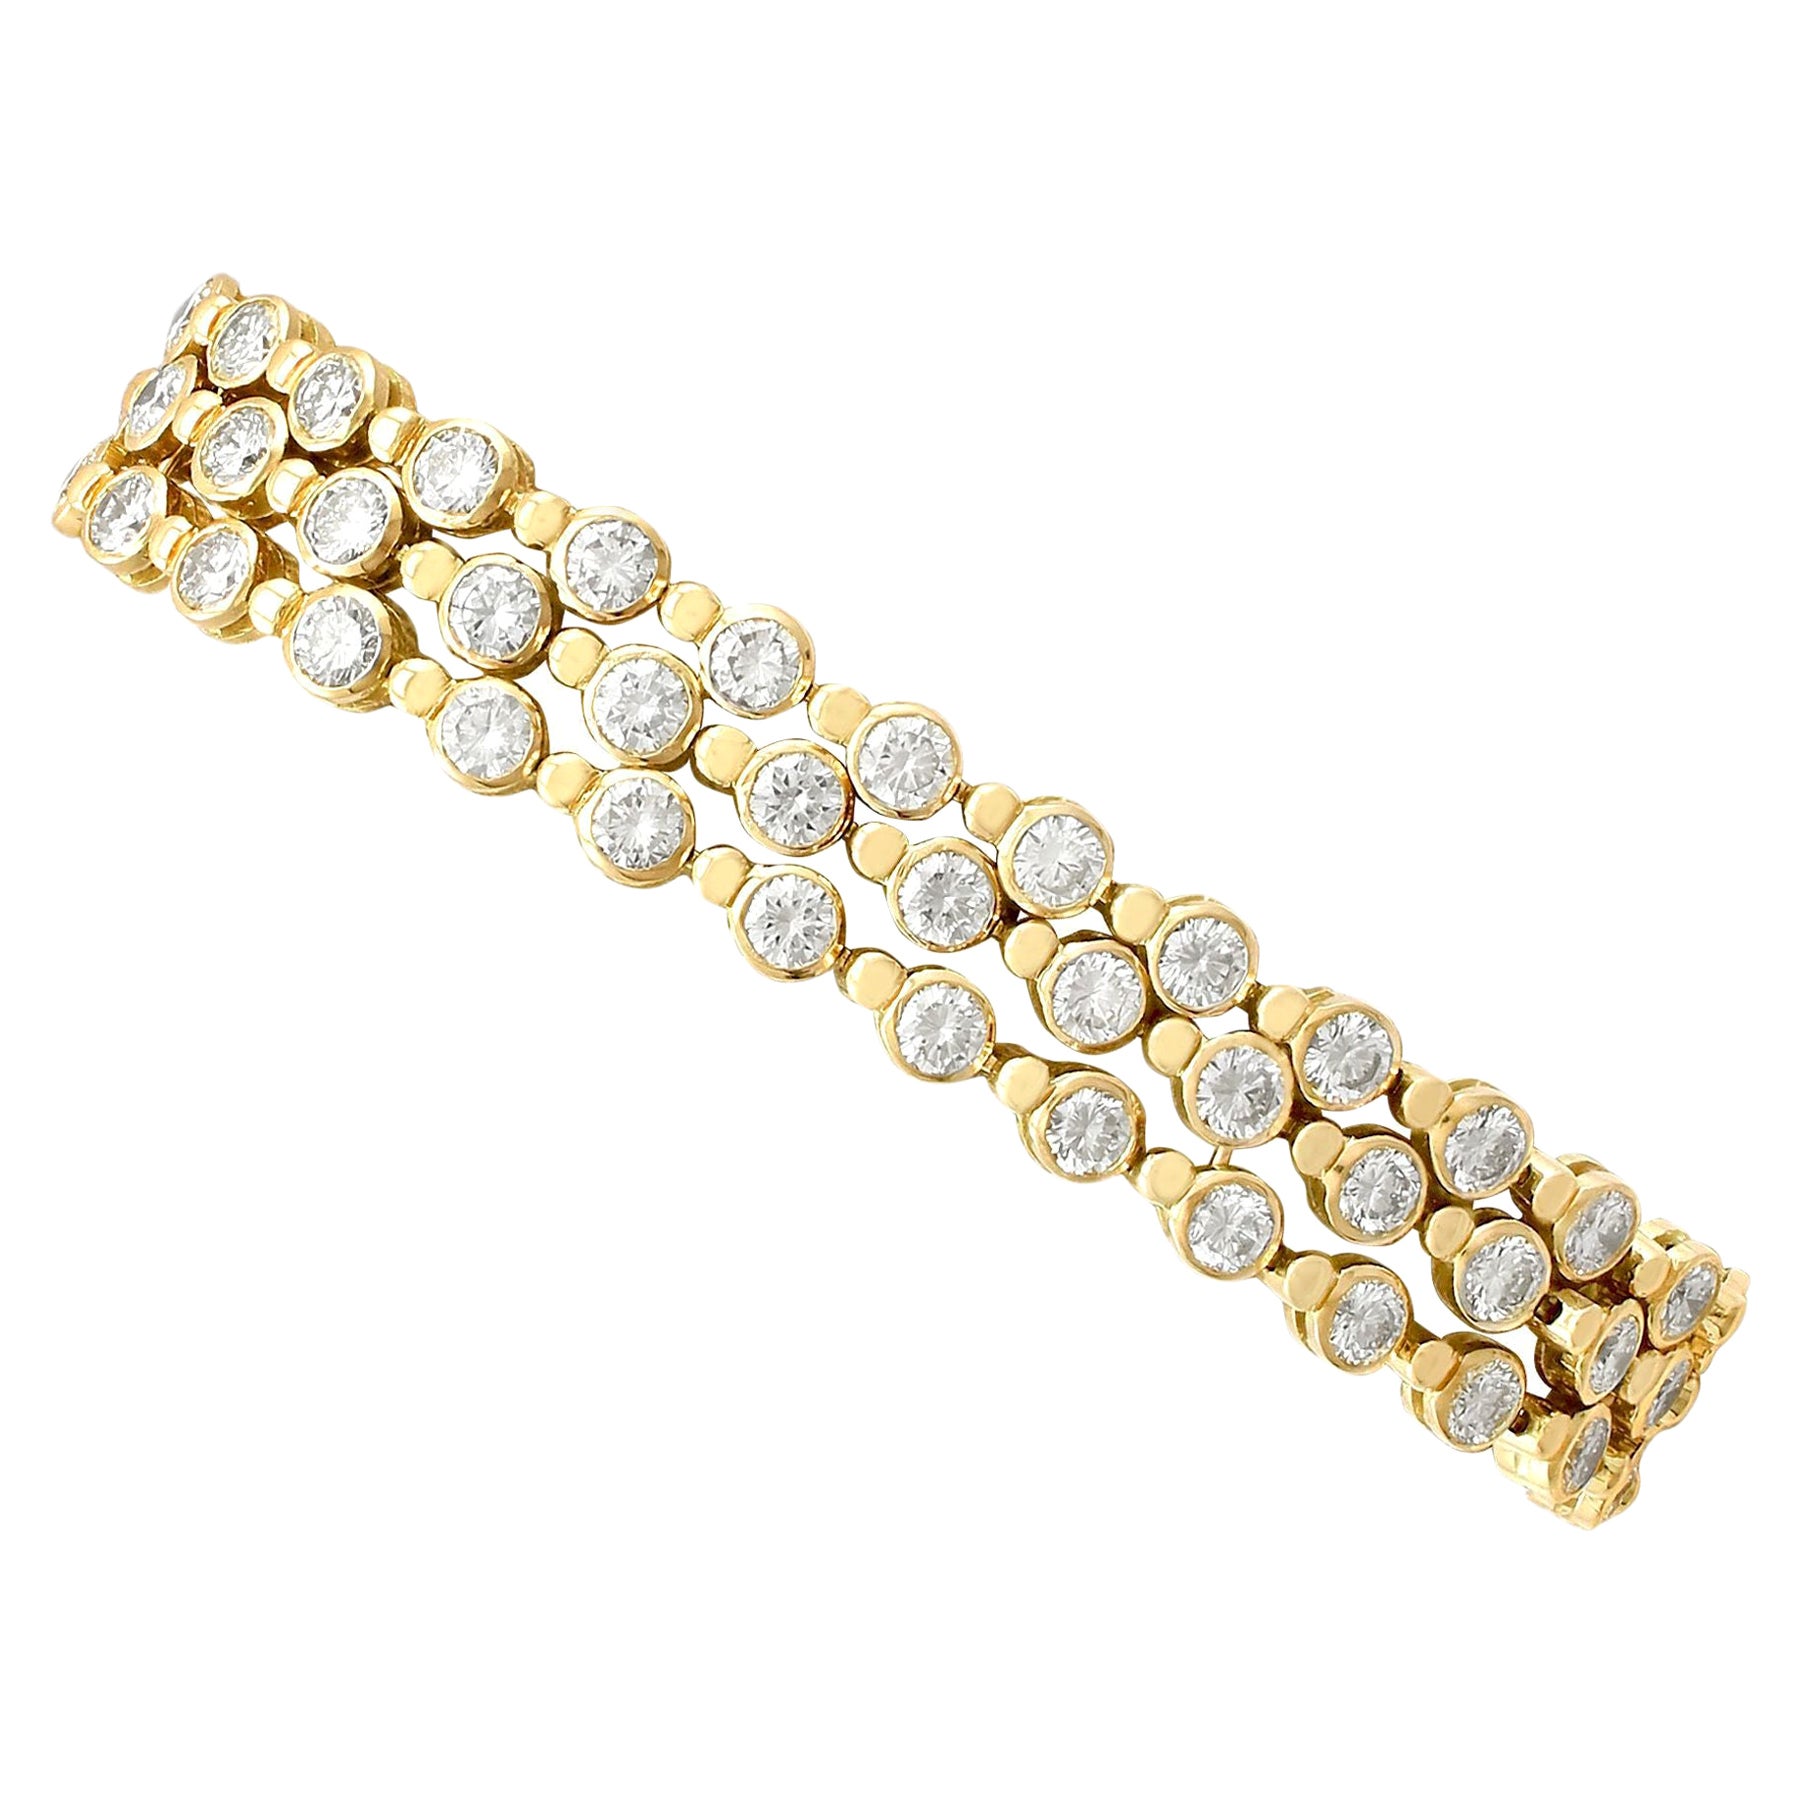 1990s French 12.96 Carat Diamond and Yellow Gold Bracelet